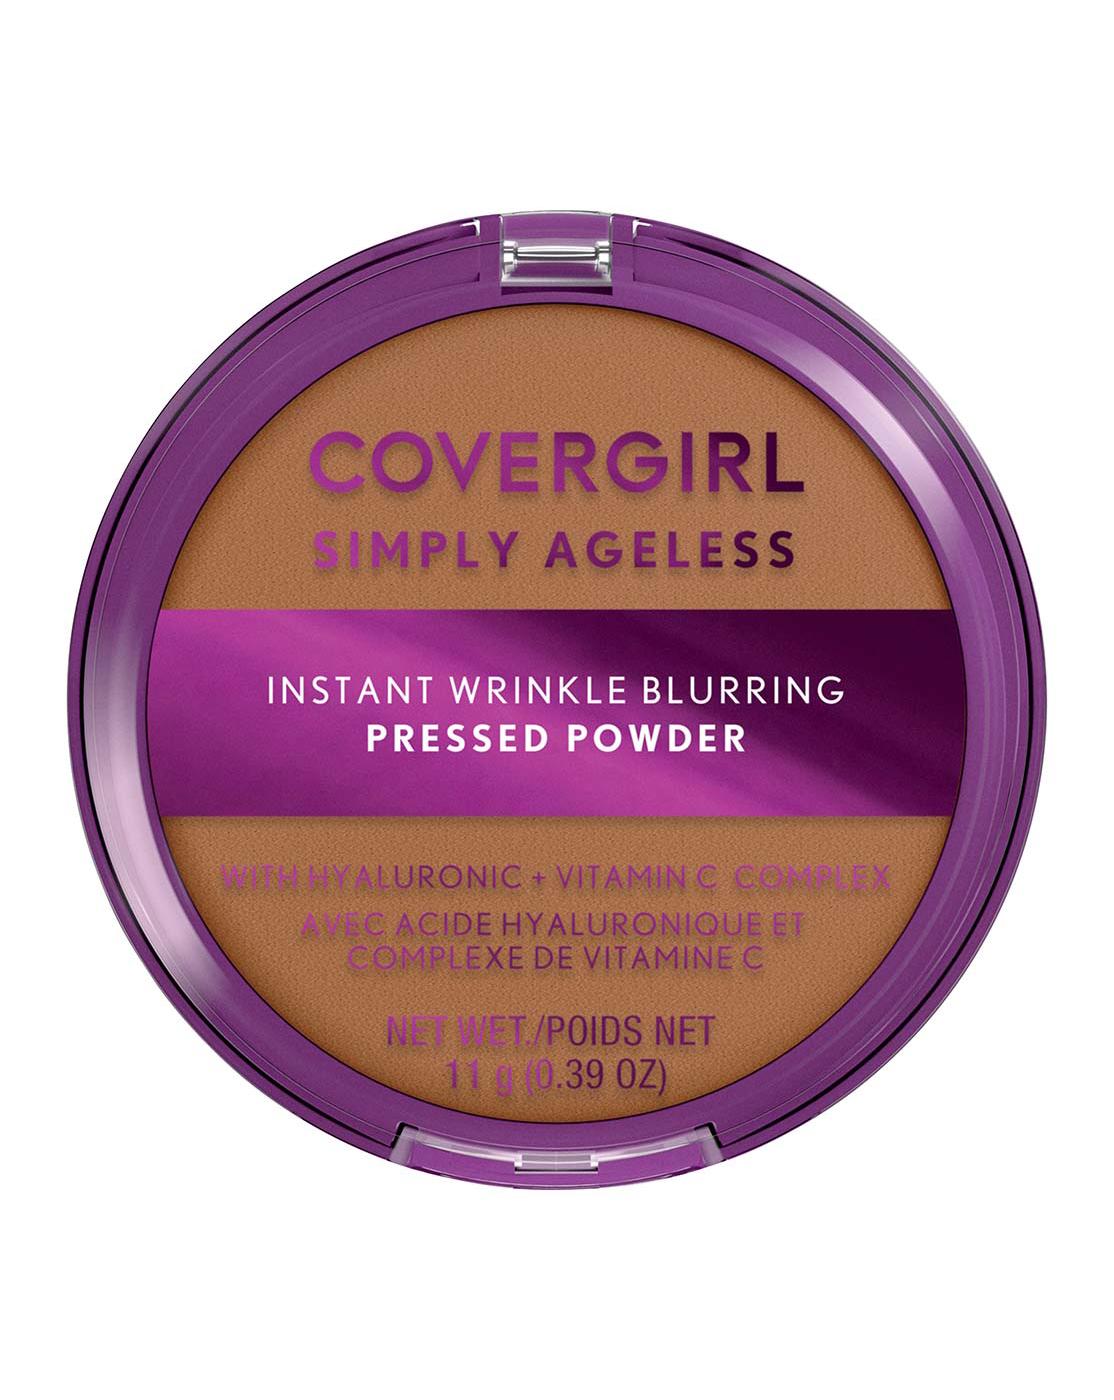 Covergirl Simply Ageless Pressed Powder 275 Soft Sable; image 1 of 10